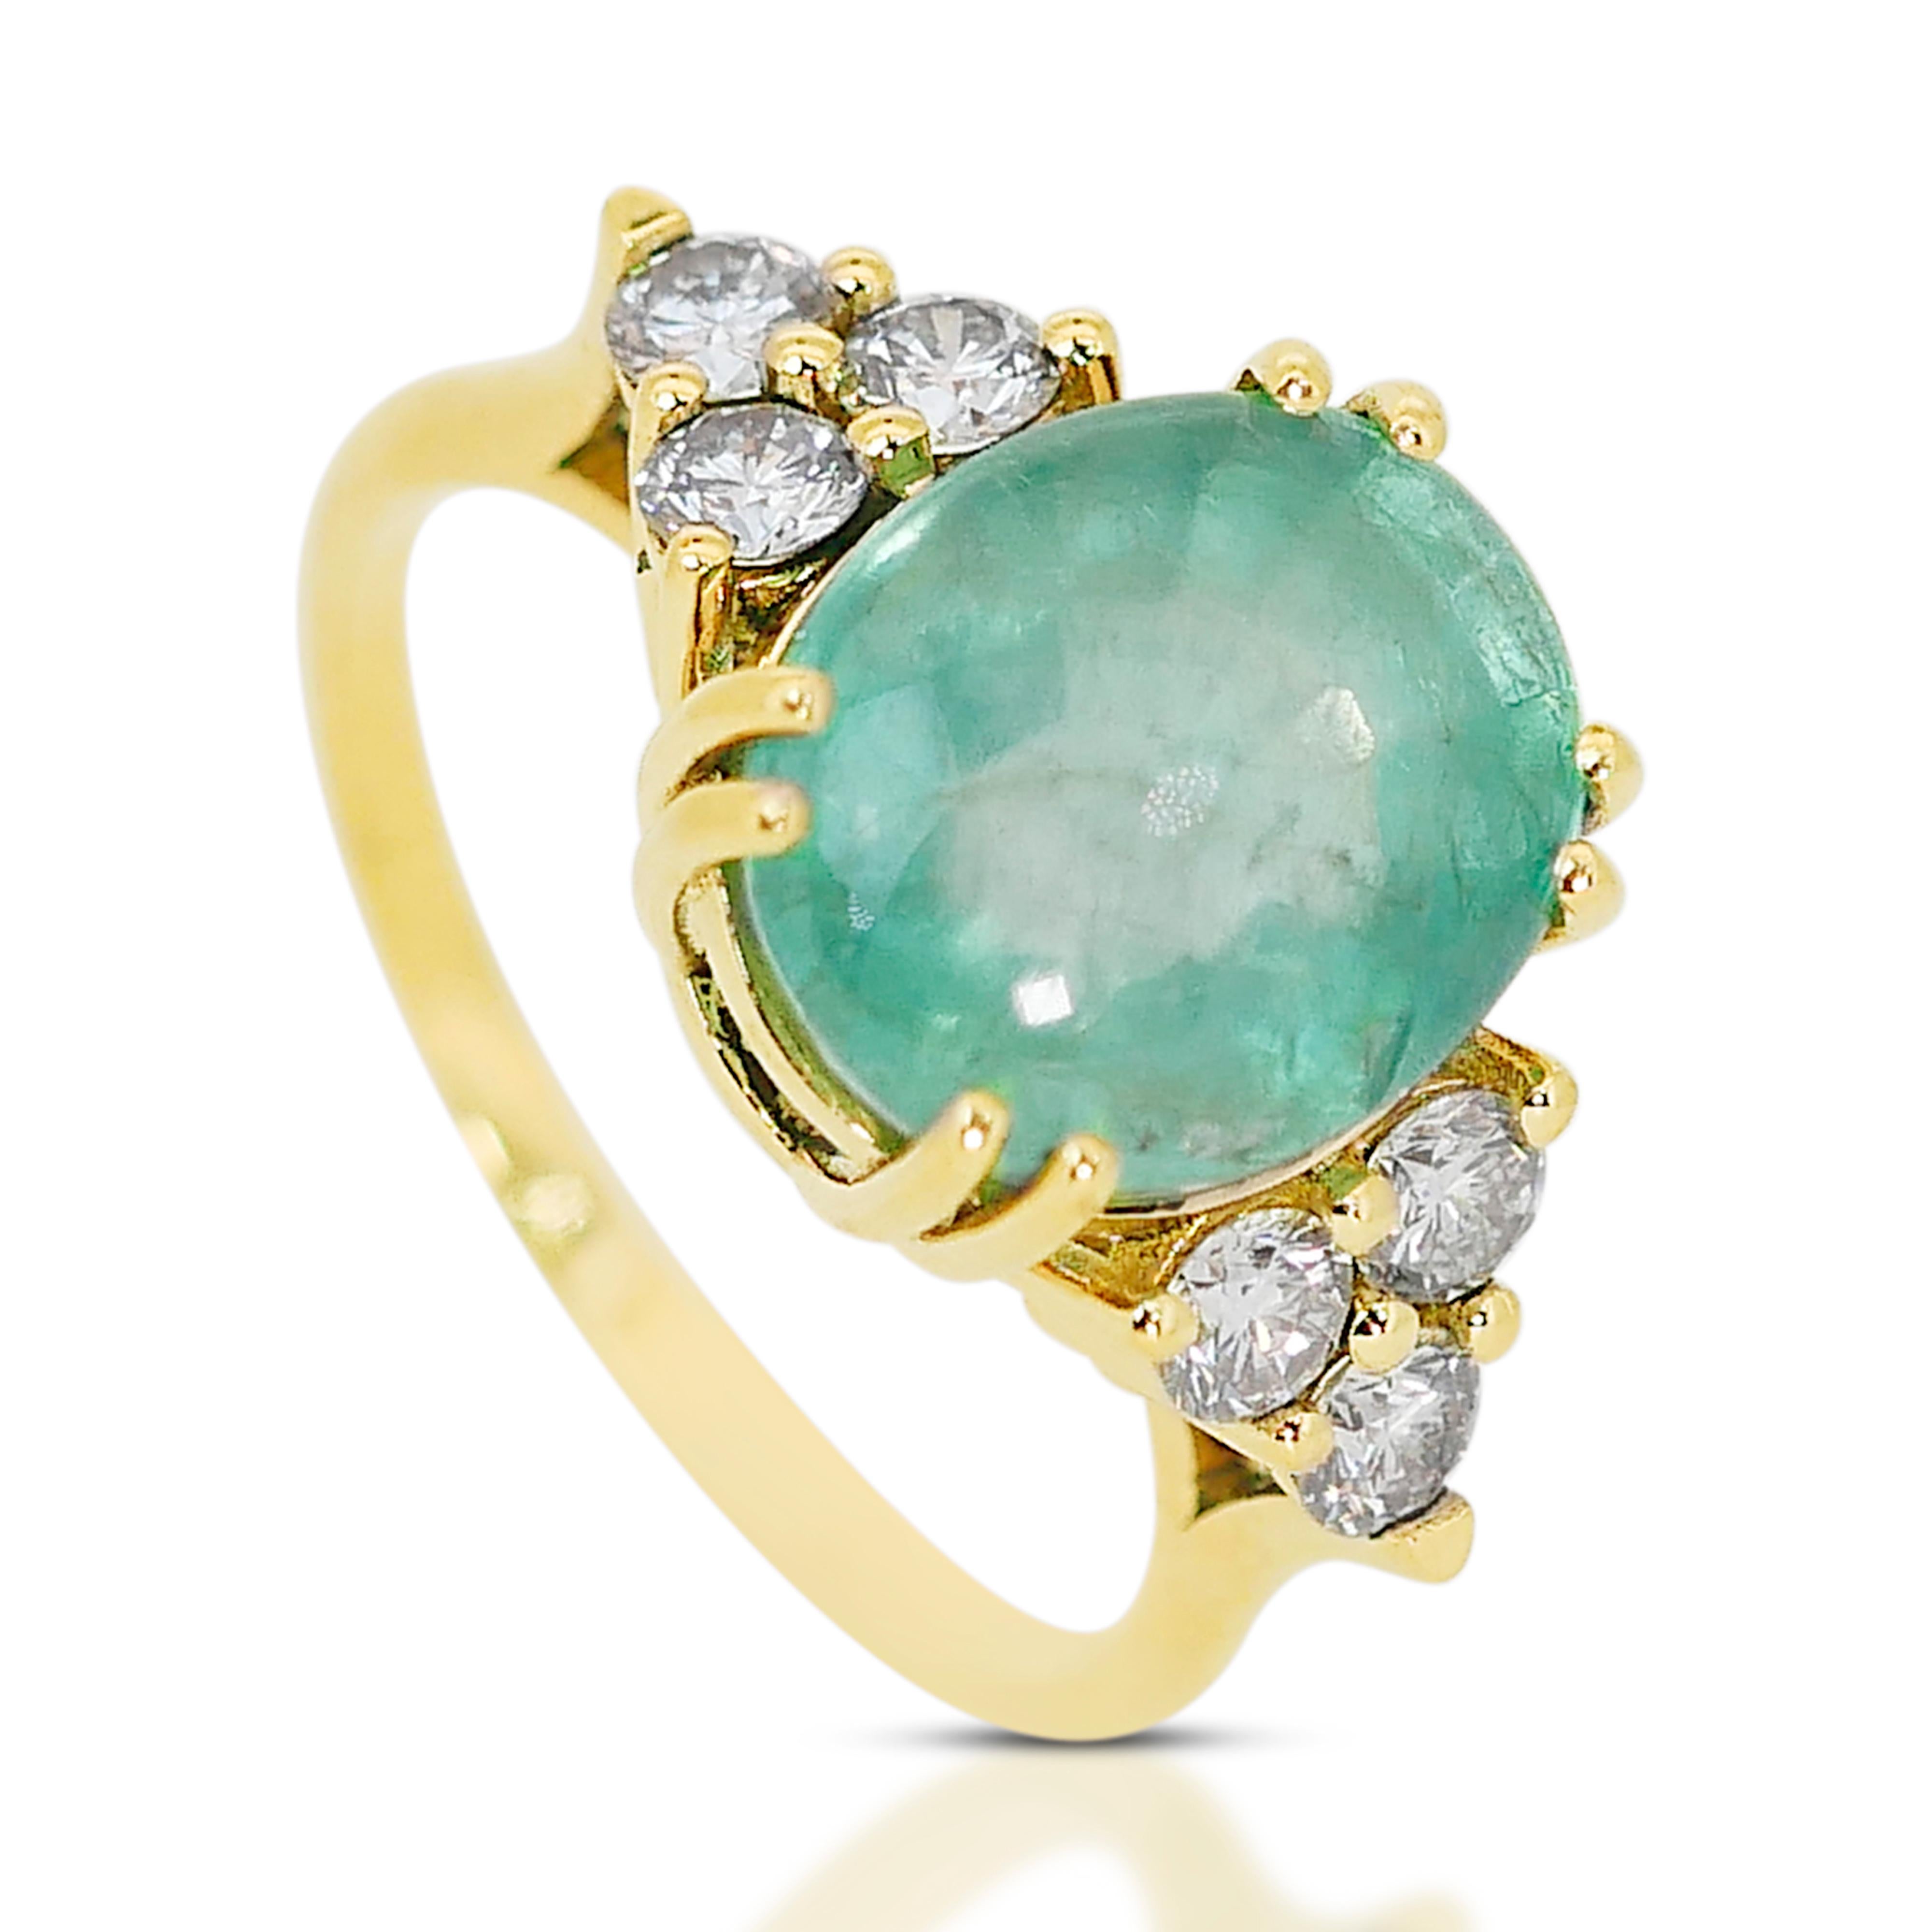 This captivating emerald ring is accompanied by an IGI Certification for authenticity and assurance. The emerald, cut into a captivating shape, is embraced by a halo of dazzling diamonds, creating a stunning contrast and enhancing the overall